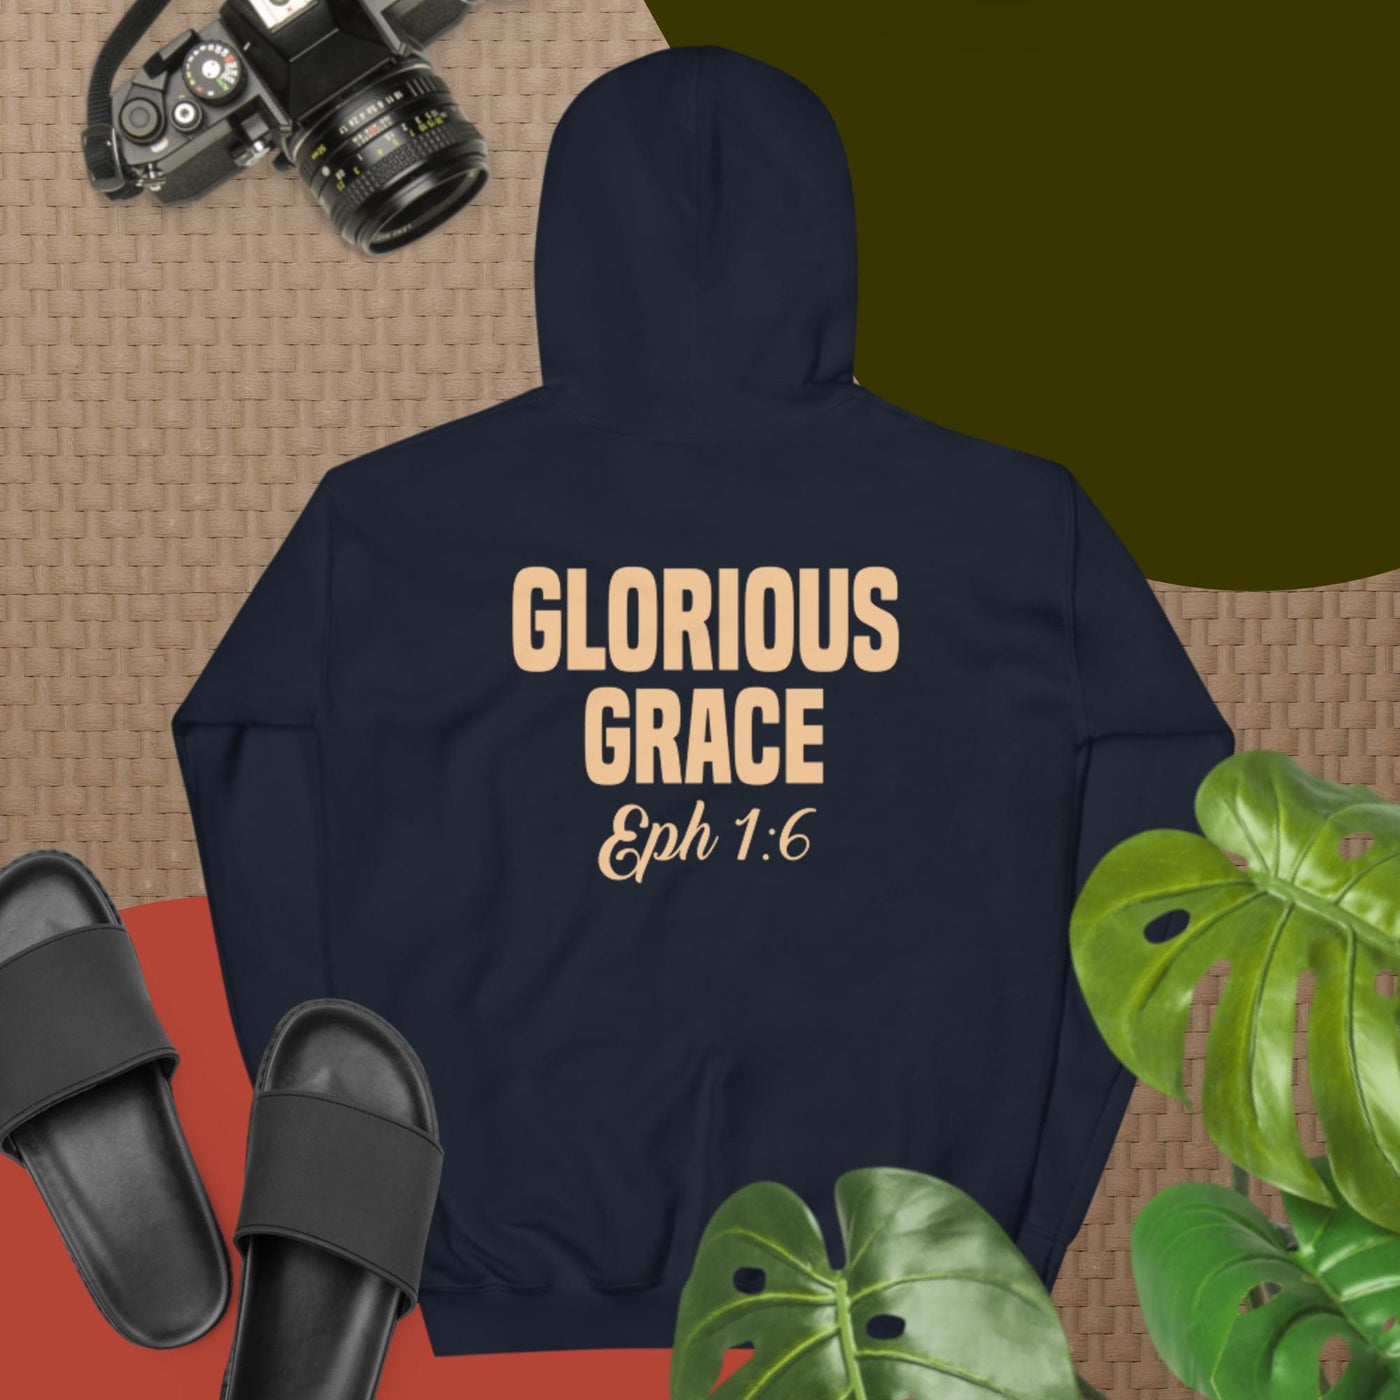 Christian Glorious Grace two sided Women's Hoodie